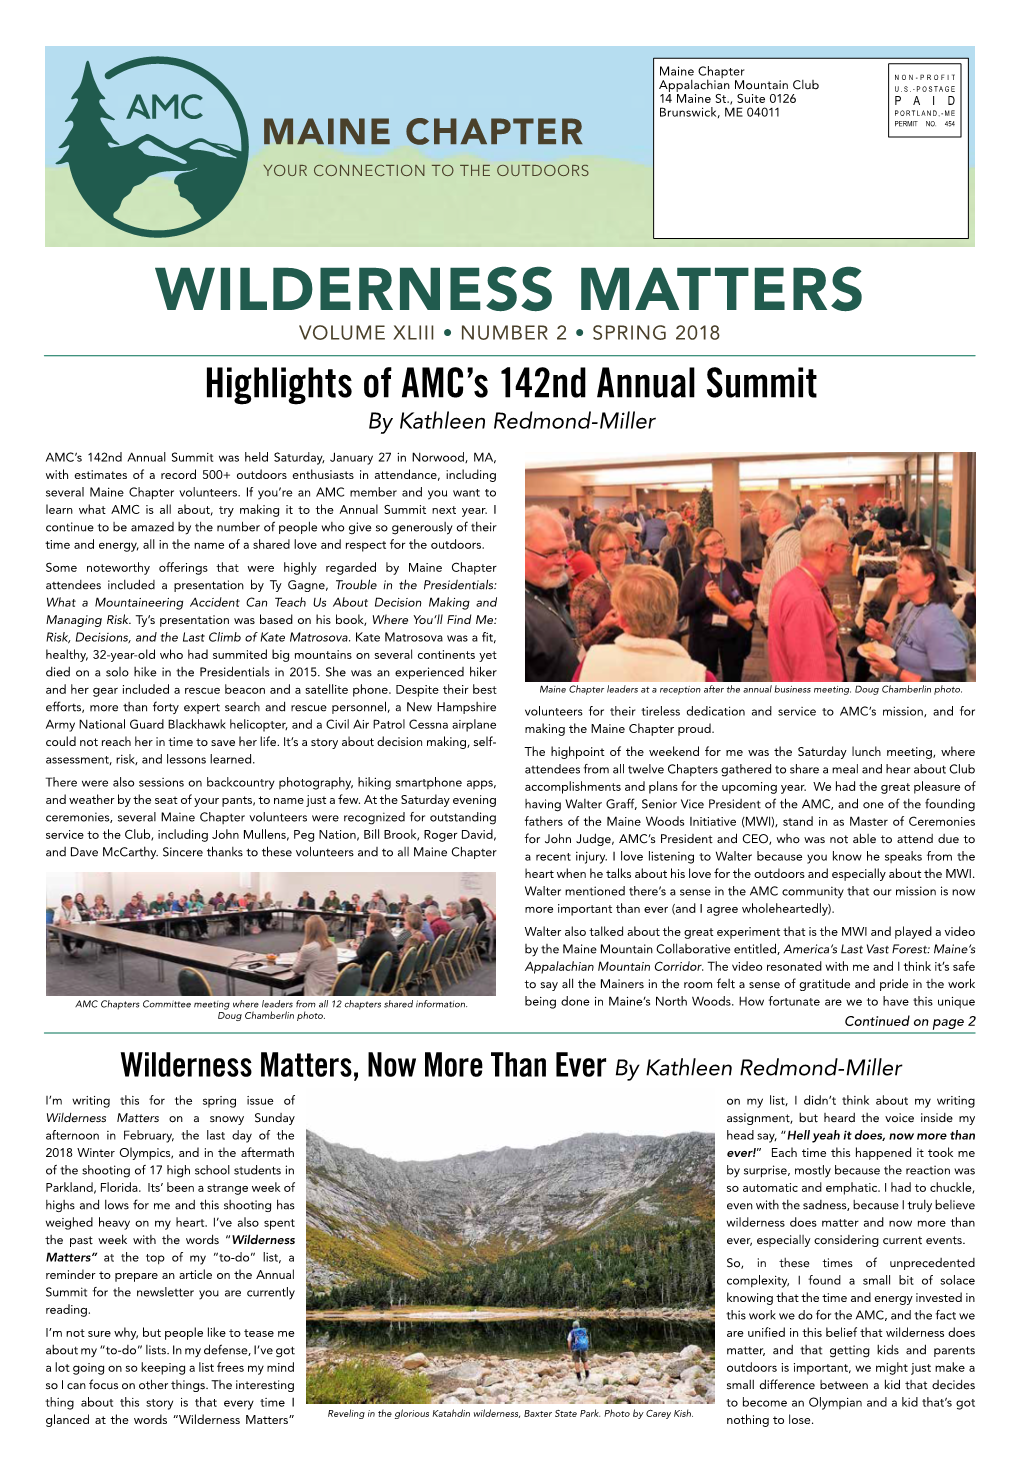 SPRING 2018 Highlights of AMC’S 142Nd Annual Summit by Kathleen Redmond-Miller